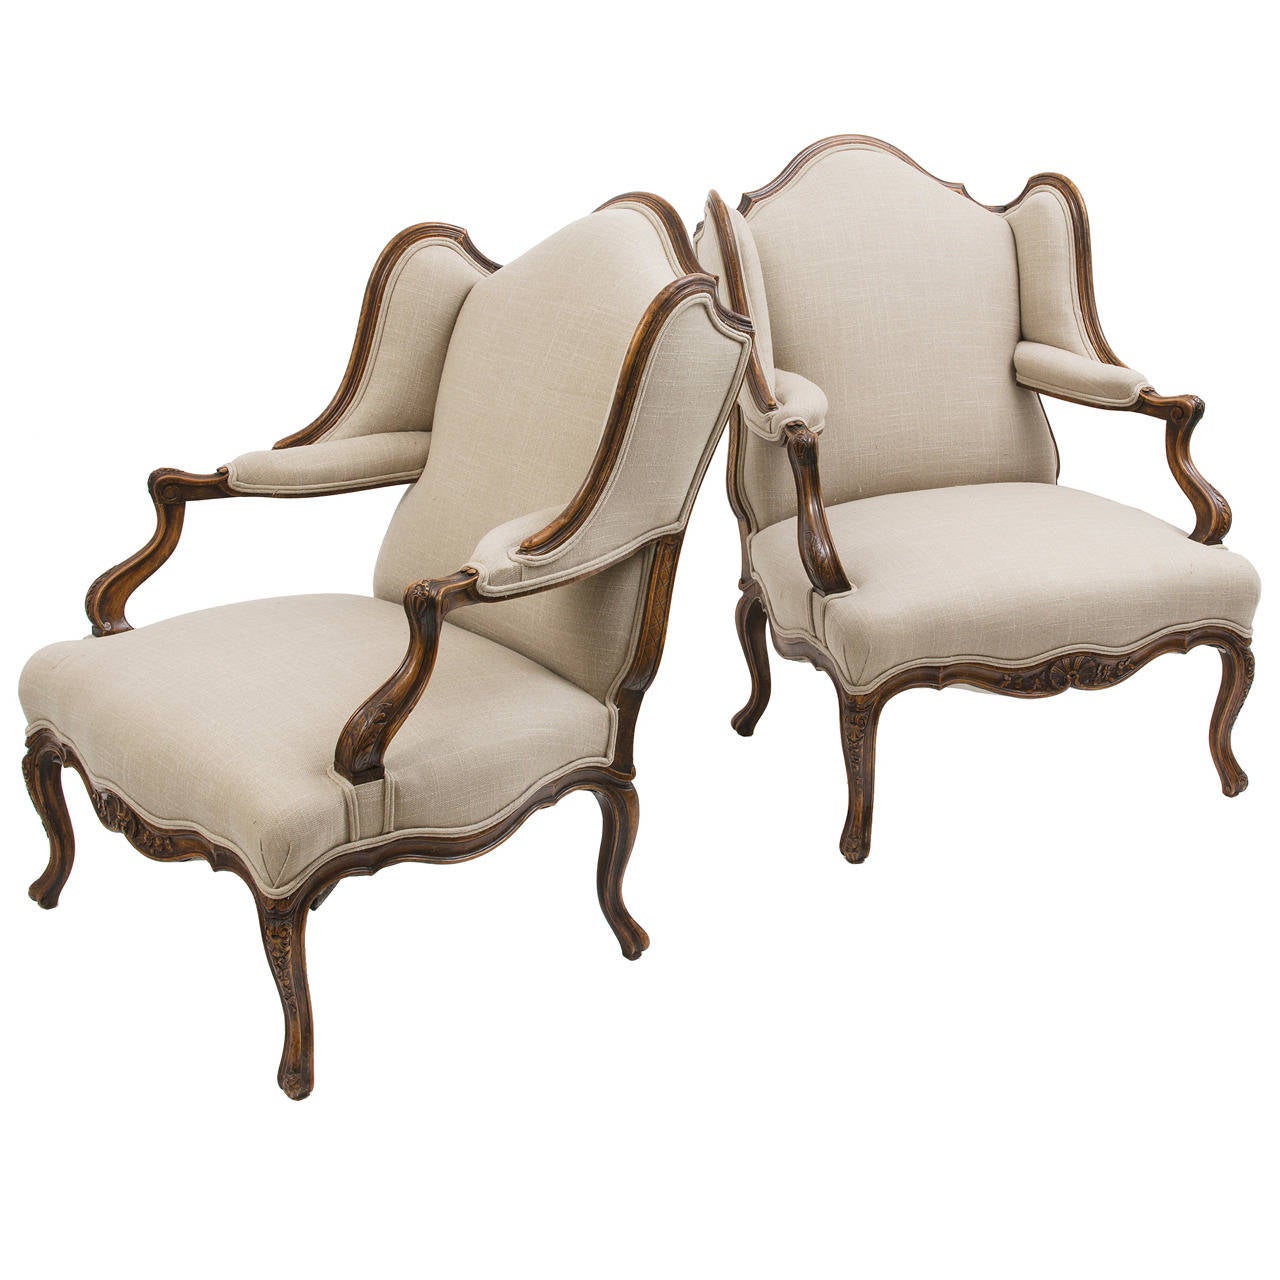 Pair of Large French Provincial Regence Style Carved Beech Wing Armchairs c.1870 For Sale